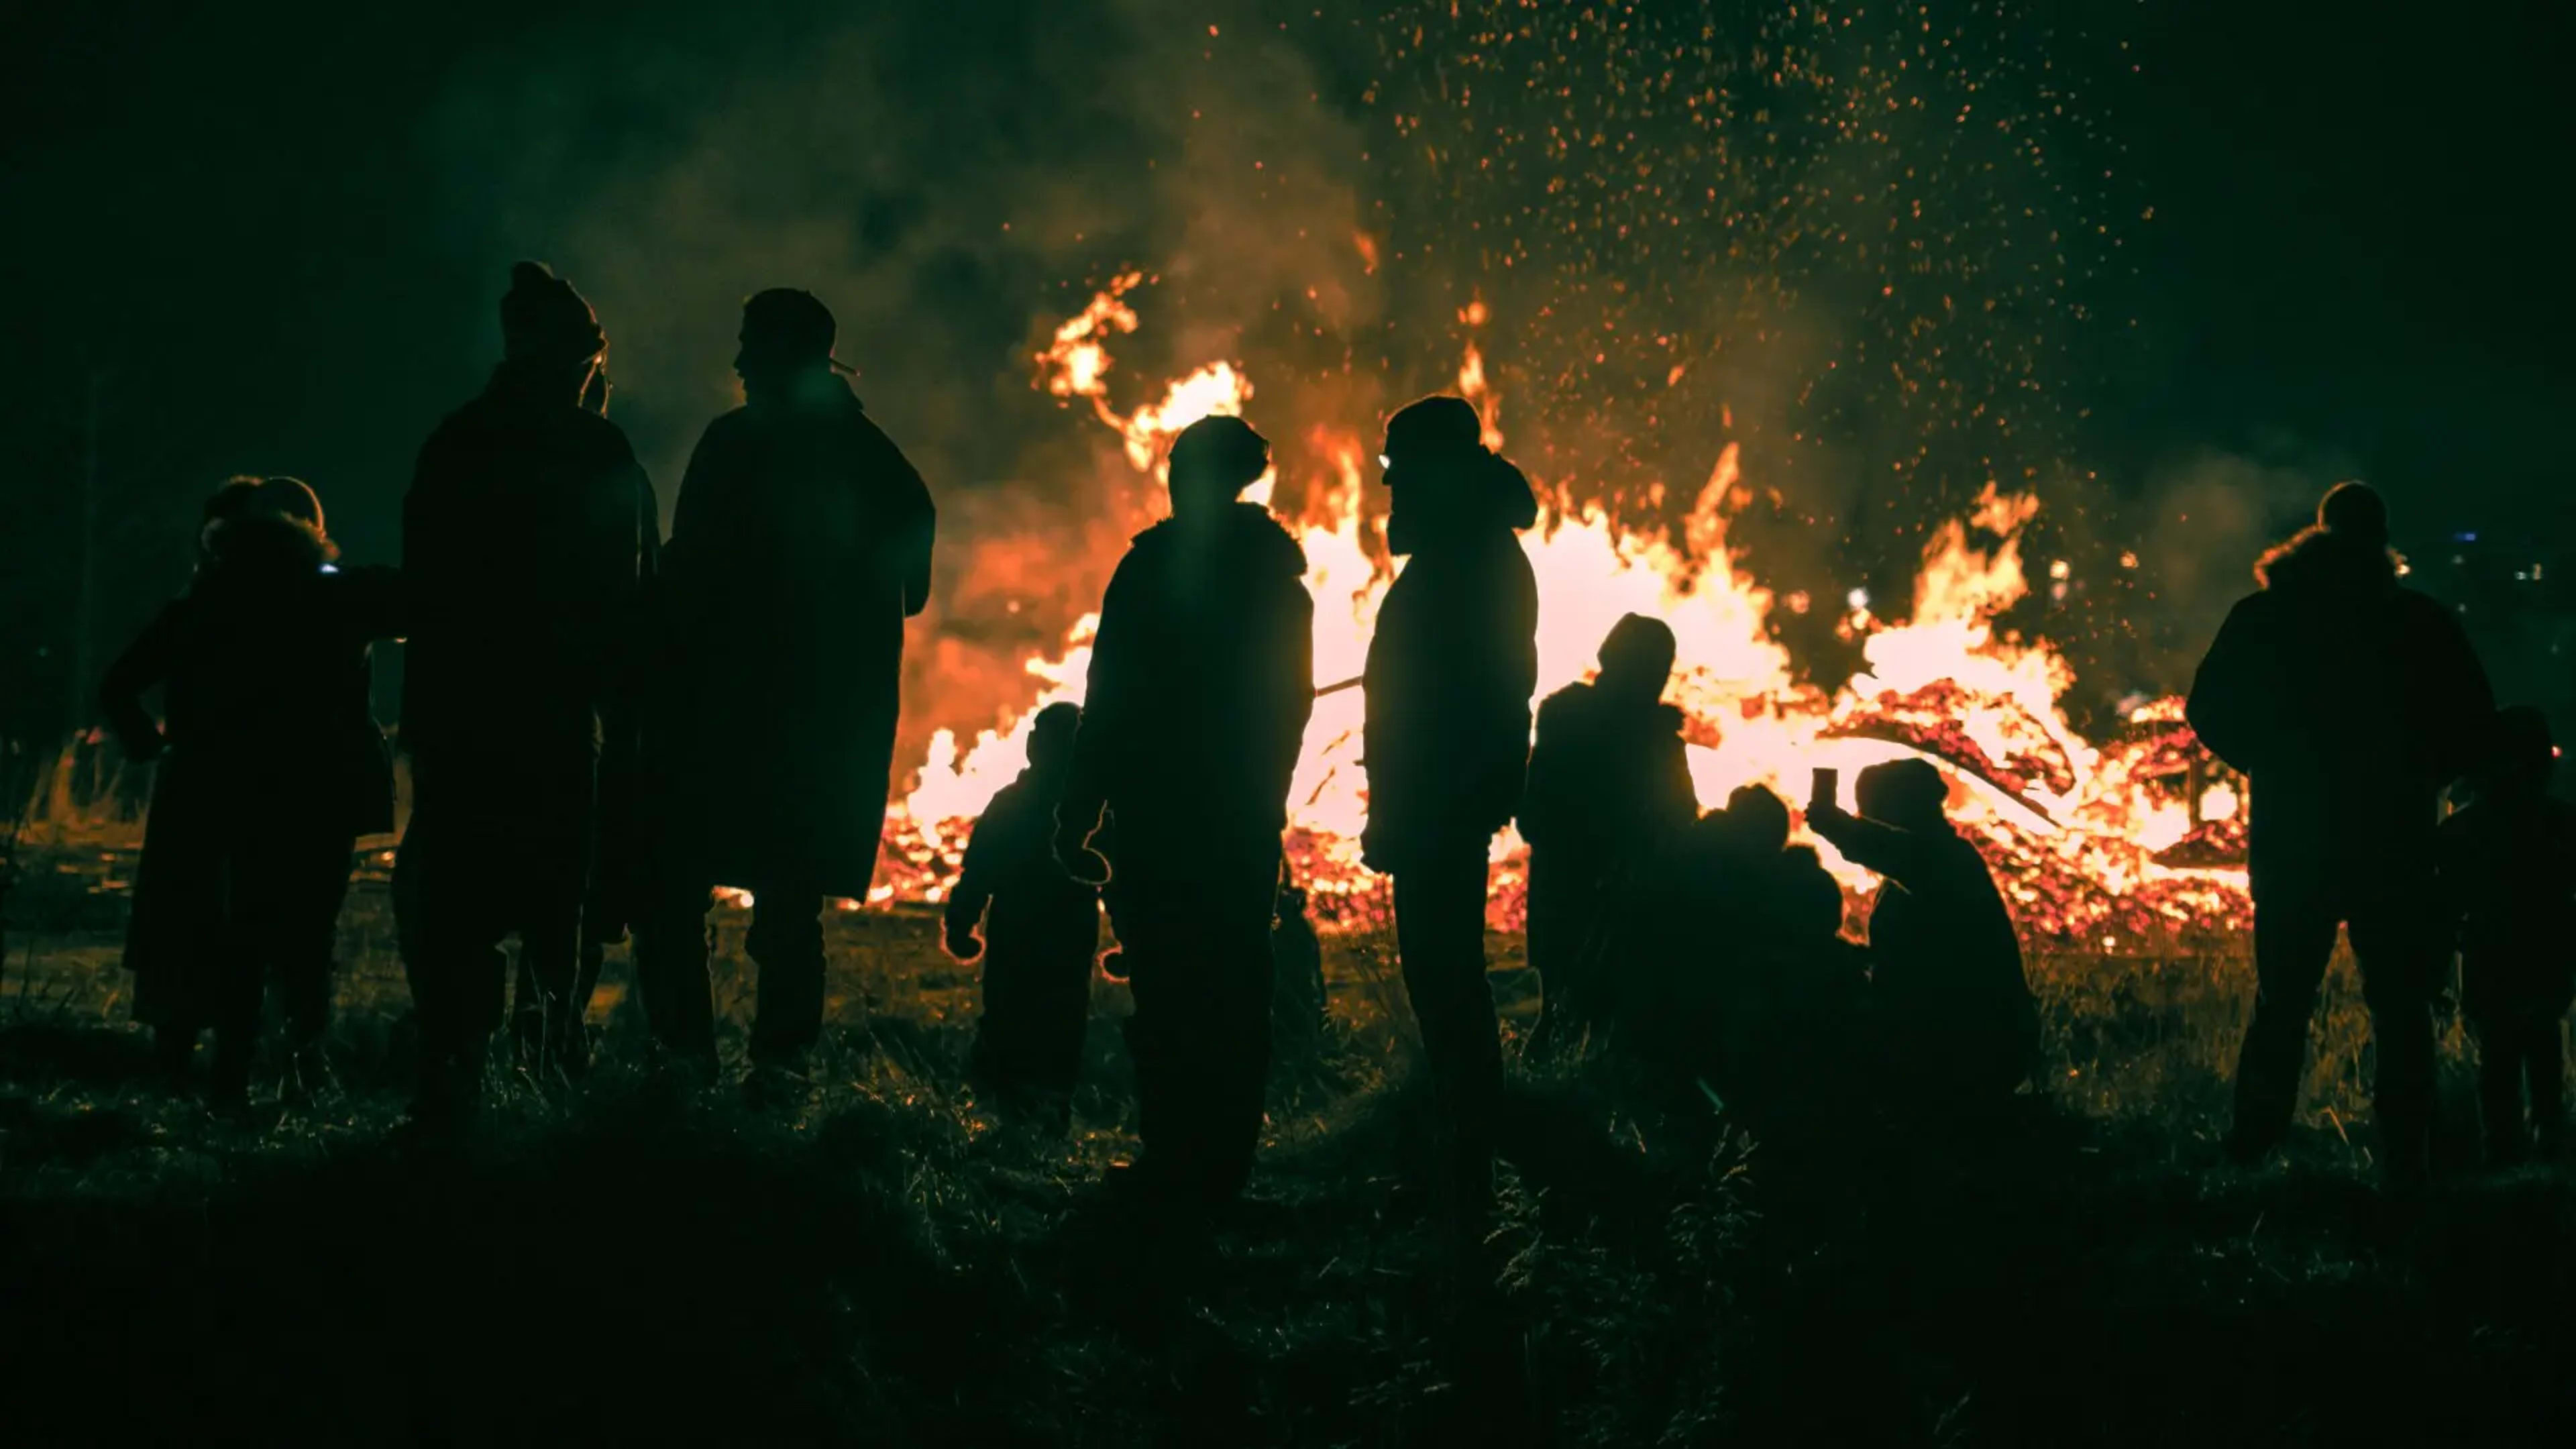 New Year's bonfire in Iceland